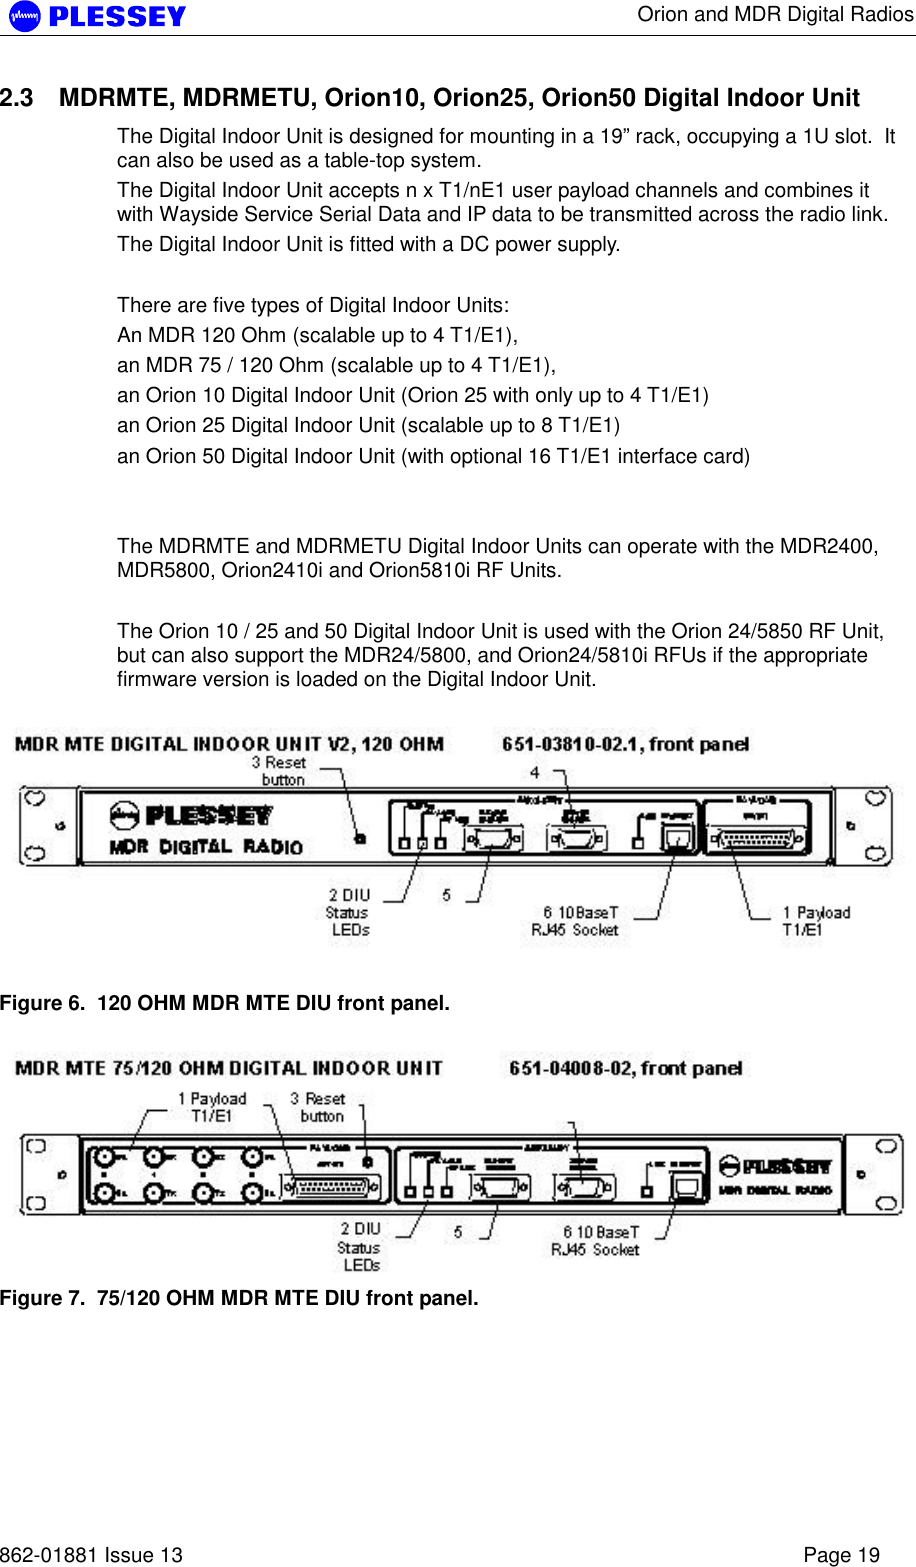      Orion and MDR Digital Radios   862-01881 Issue 13    Page 19 2.3  MDRMTE, MDRMETU, Orion10, Orion25, Orion50 Digital Indoor Unit The Digital Indoor Unit is designed for mounting in a 19” rack, occupying a 1U slot.  It can also be used as a table-top system. The Digital Indoor Unit accepts n x T1/nE1 user payload channels and combines it with Wayside Service Serial Data and IP data to be transmitted across the radio link. The Digital Indoor Unit is fitted with a DC power supply.  There are five types of Digital Indoor Units: An MDR 120 Ohm (scalable up to 4 T1/E1),  an MDR 75 / 120 Ohm (scalable up to 4 T1/E1), an Orion 10 Digital Indoor Unit (Orion 25 with only up to 4 T1/E1) an Orion 25 Digital Indoor Unit (scalable up to 8 T1/E1) an Orion 50 Digital Indoor Unit (with optional 16 T1/E1 interface card)     The MDRMTE and MDRMETU Digital Indoor Units can operate with the MDR2400, MDR5800, Orion2410i and Orion5810i RF Units.  The Orion 10 / 25 and 50 Digital Indoor Unit is used with the Orion 24/5850 RF Unit, but can also support the MDR24/5800, and Orion24/5810i RFUs if the appropriate firmware version is loaded on the Digital Indoor Unit.   Figure 6.  120 OHM MDR MTE DIU front panel.   Figure 7.  75/120 OHM MDR MTE DIU front panel.  